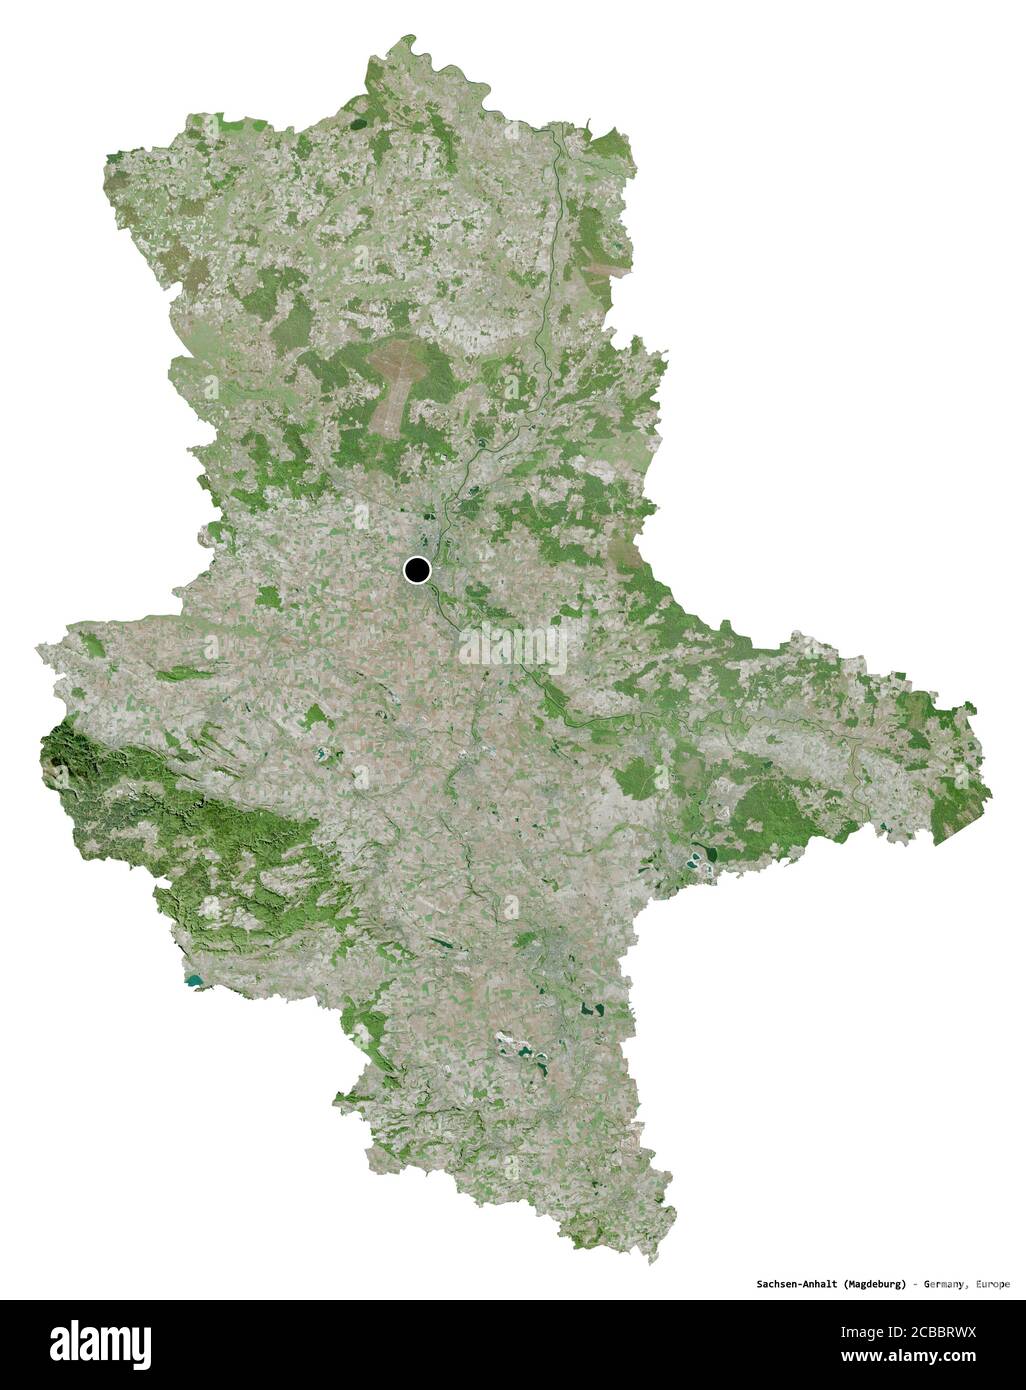 Shape of Sachsen-Anhalt, state of Germany, with its capital isolated on white background. Satellite imagery. 3D rendering Stock Photo